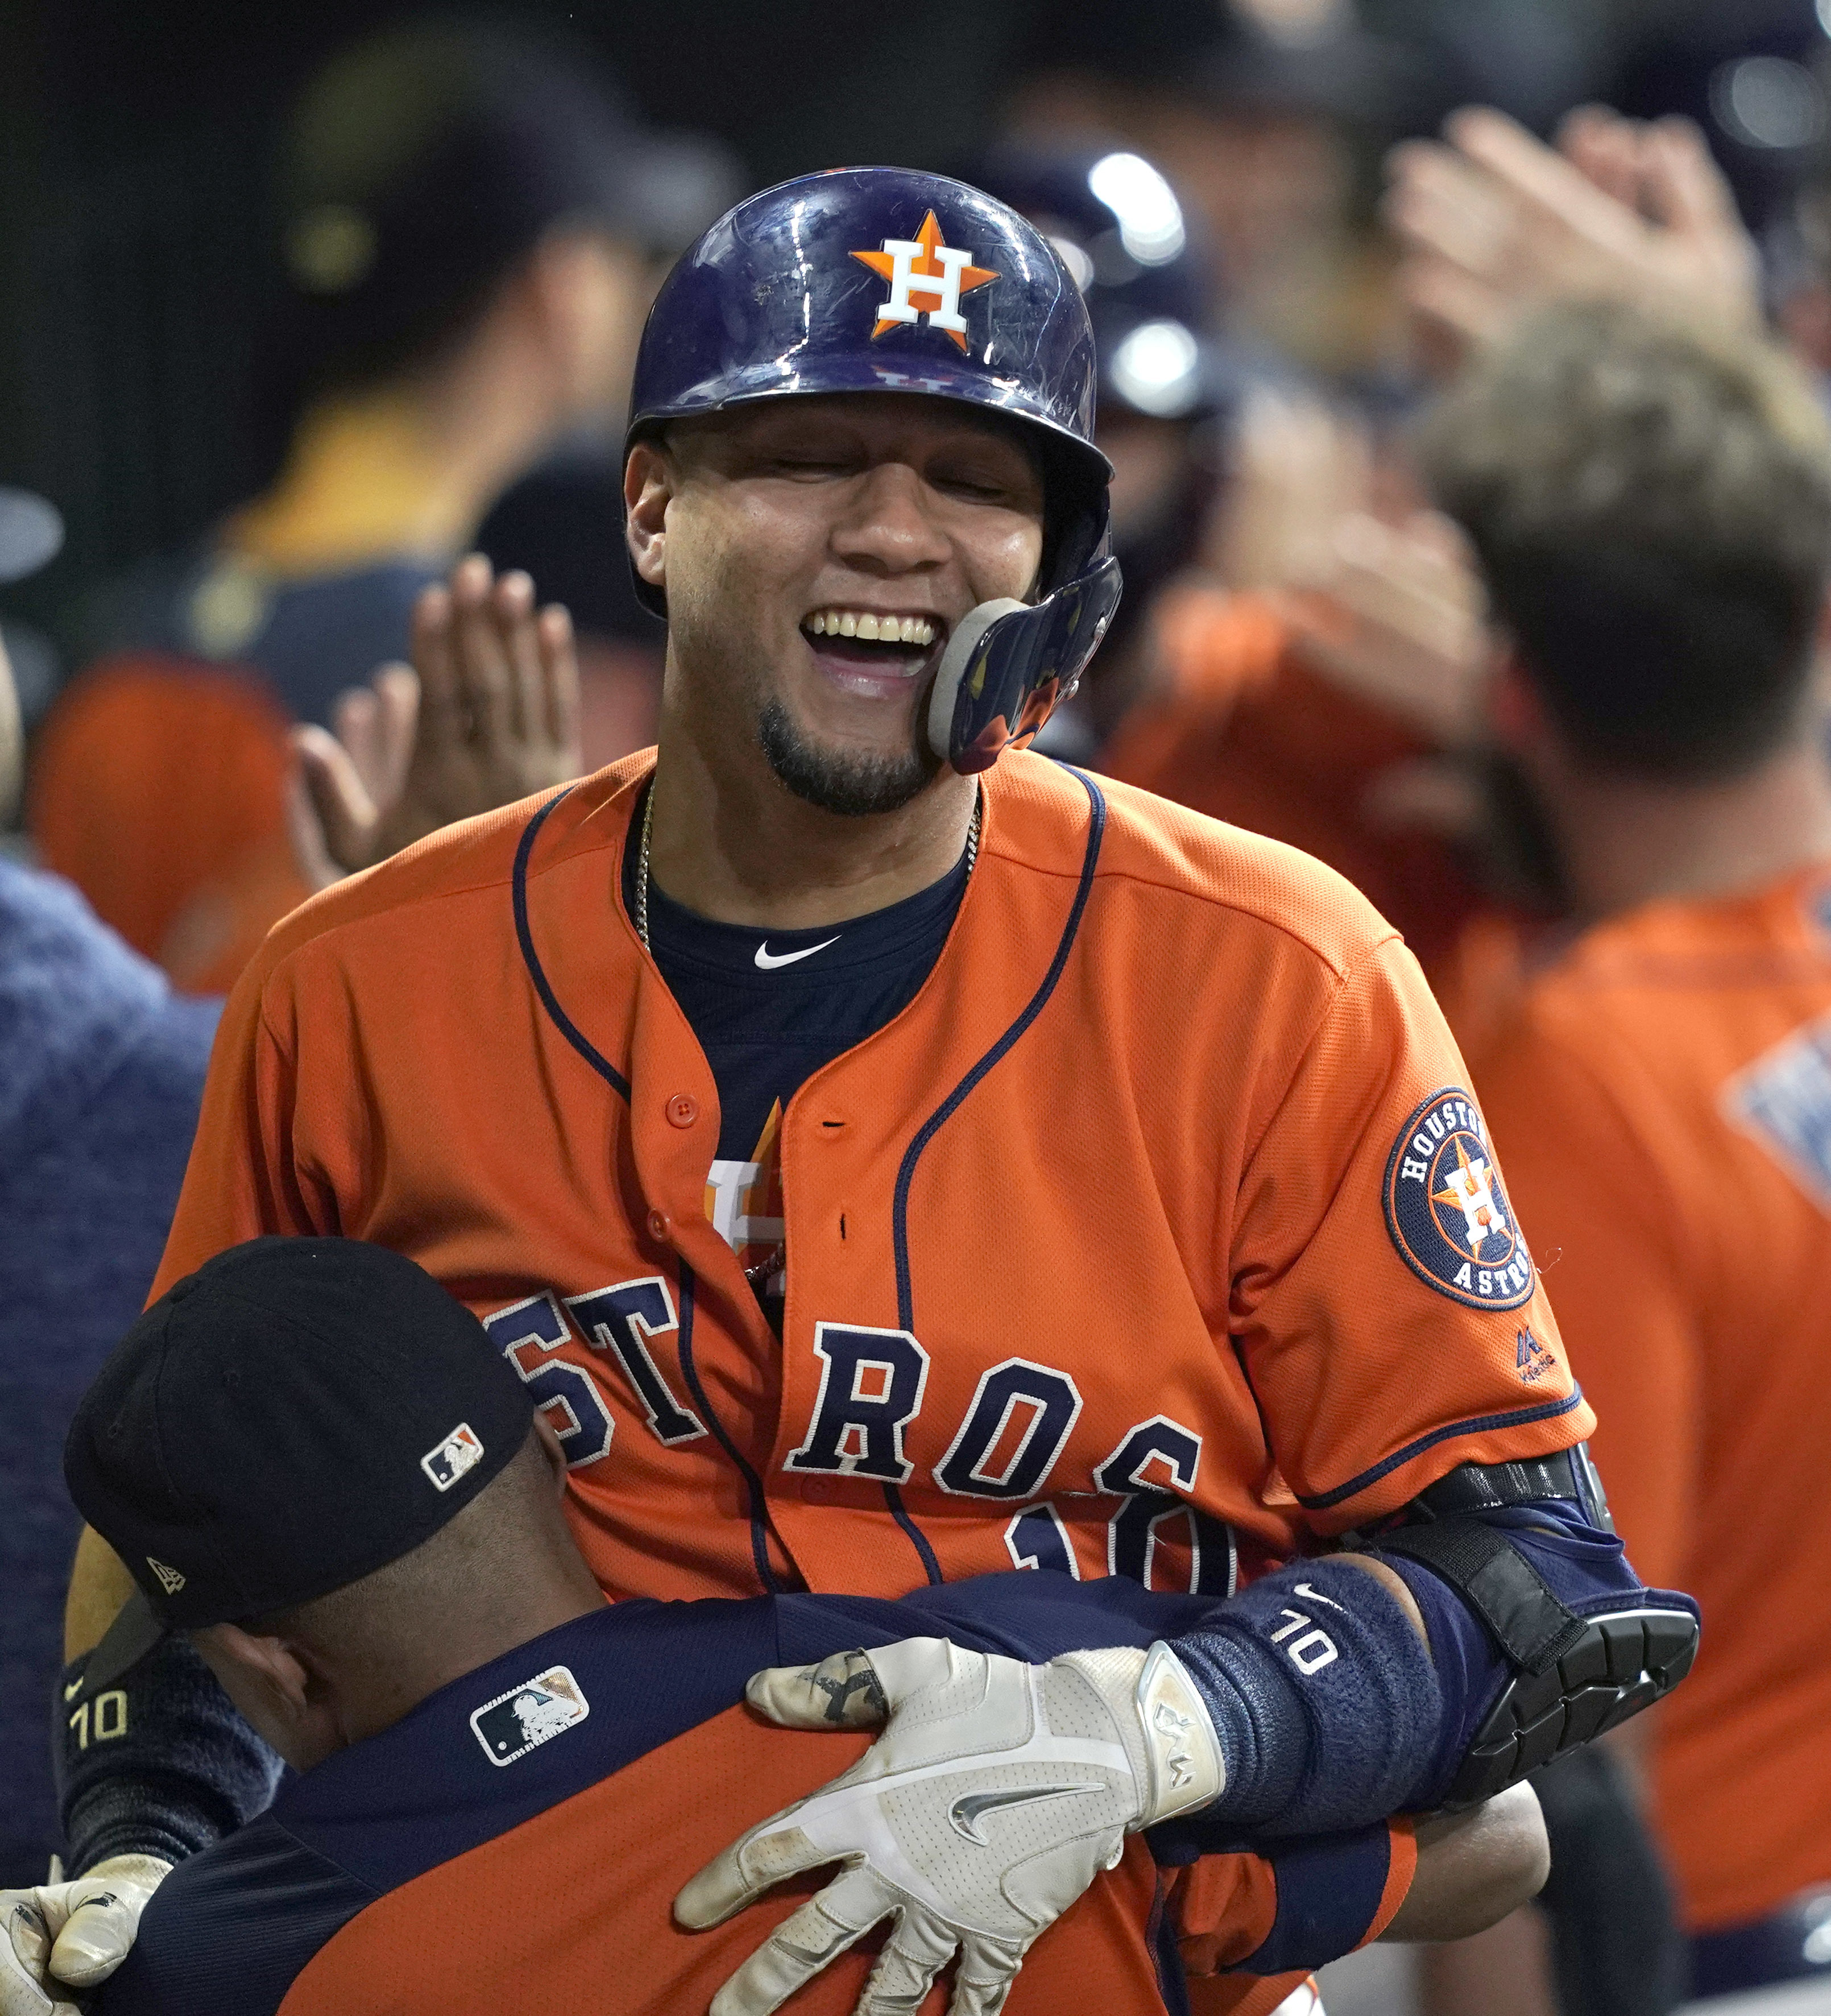 Gurriel homers twice as Astros punch playoff ticket